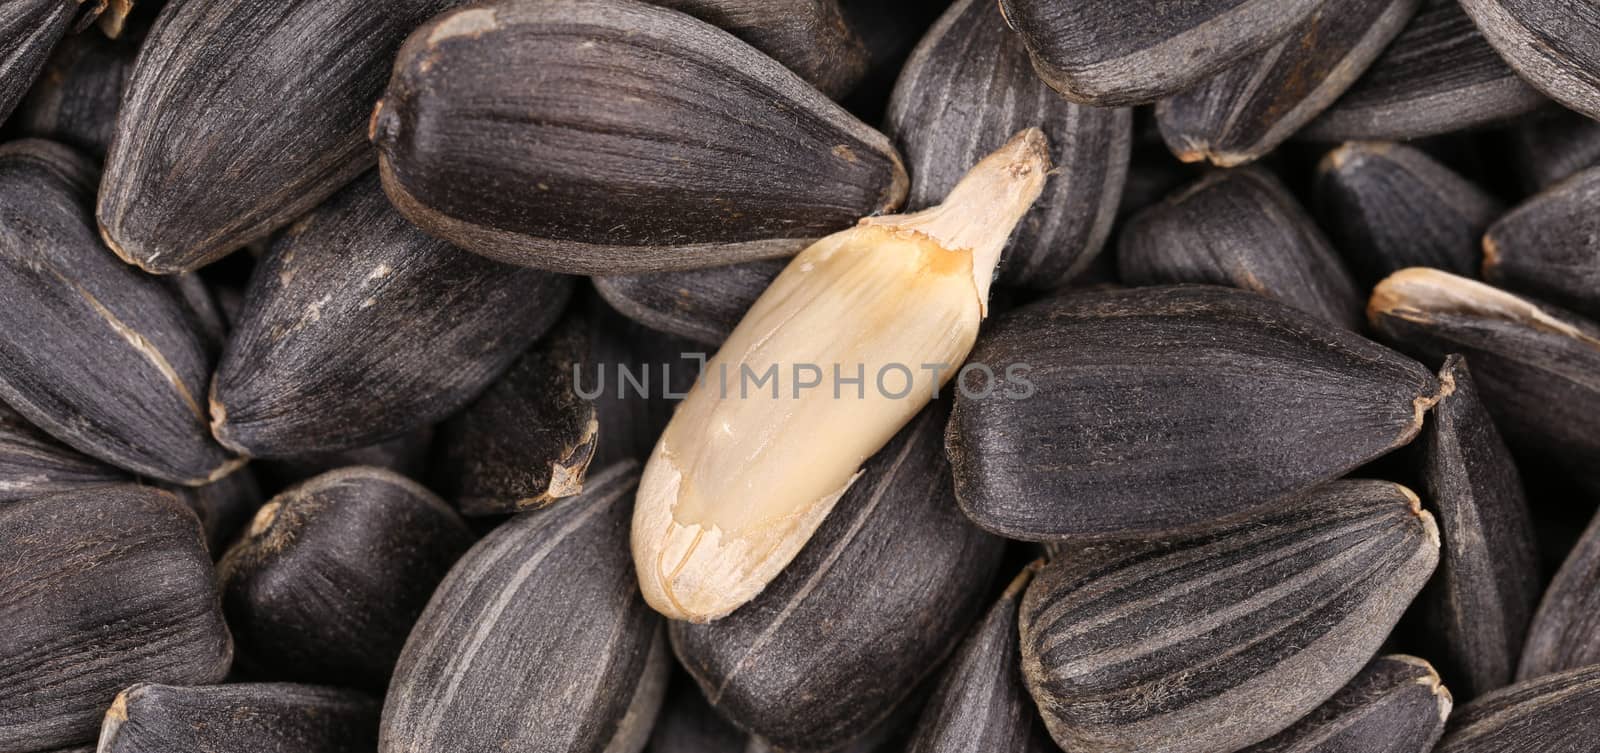 Close up of black sunflower seeds. by indigolotos